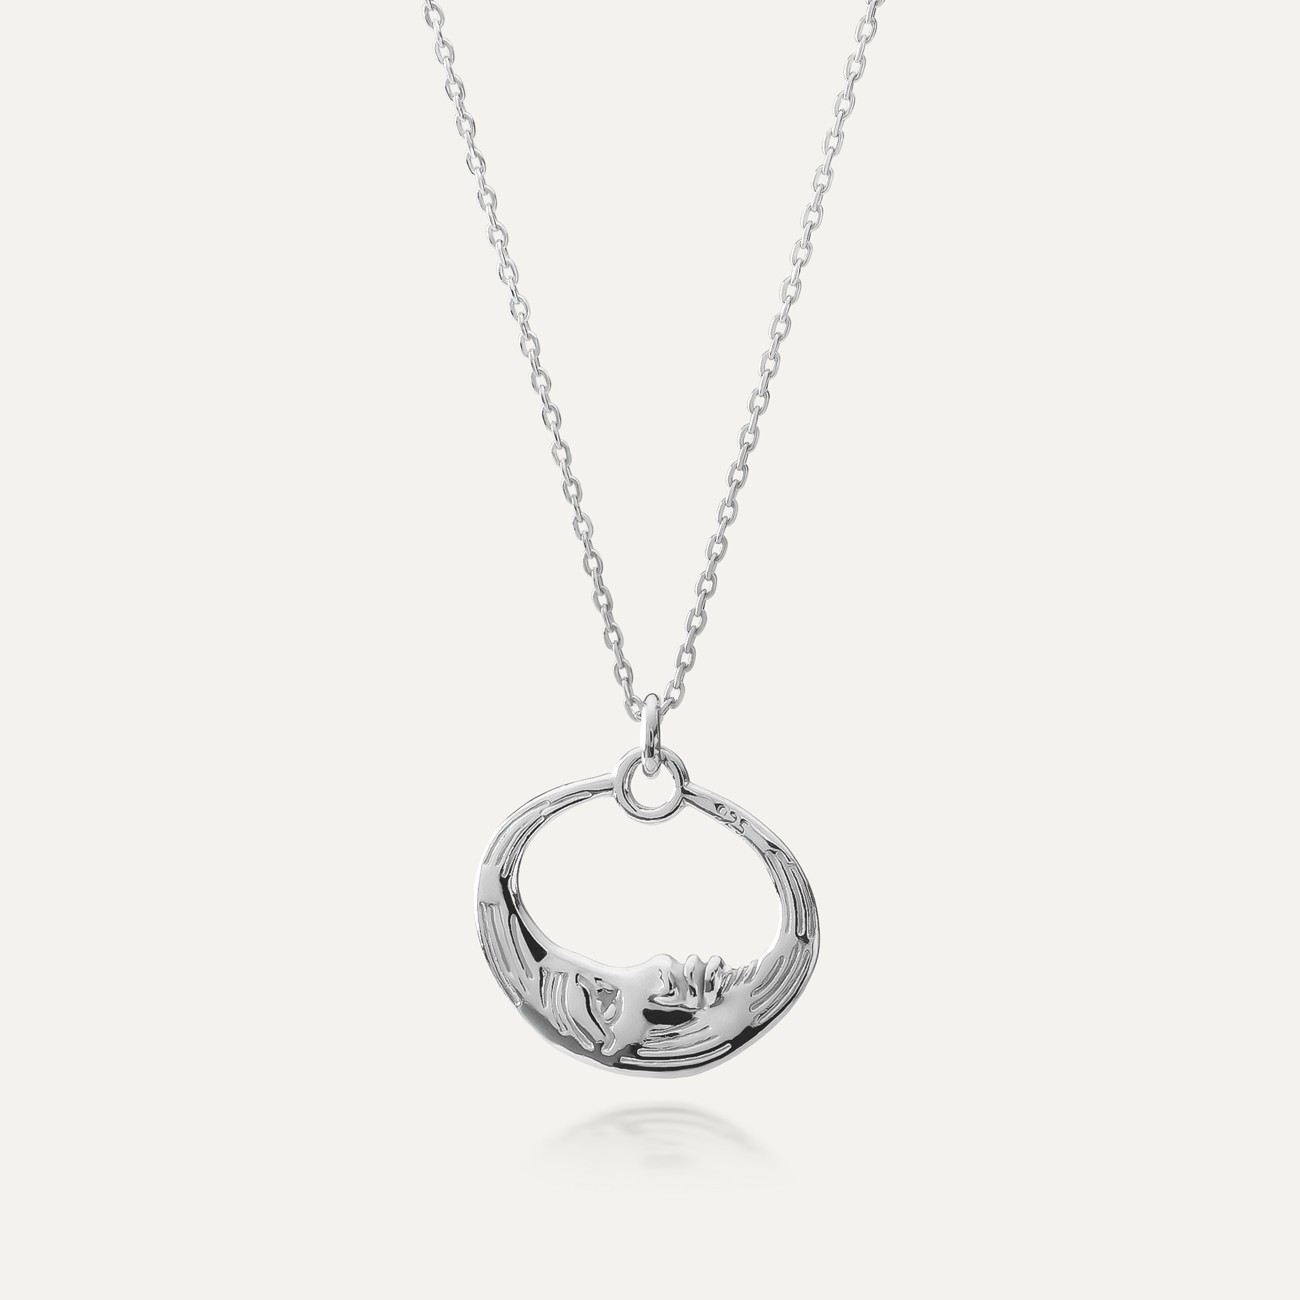 Silver moon necklace, AUGUSTYNKA x GIORRE